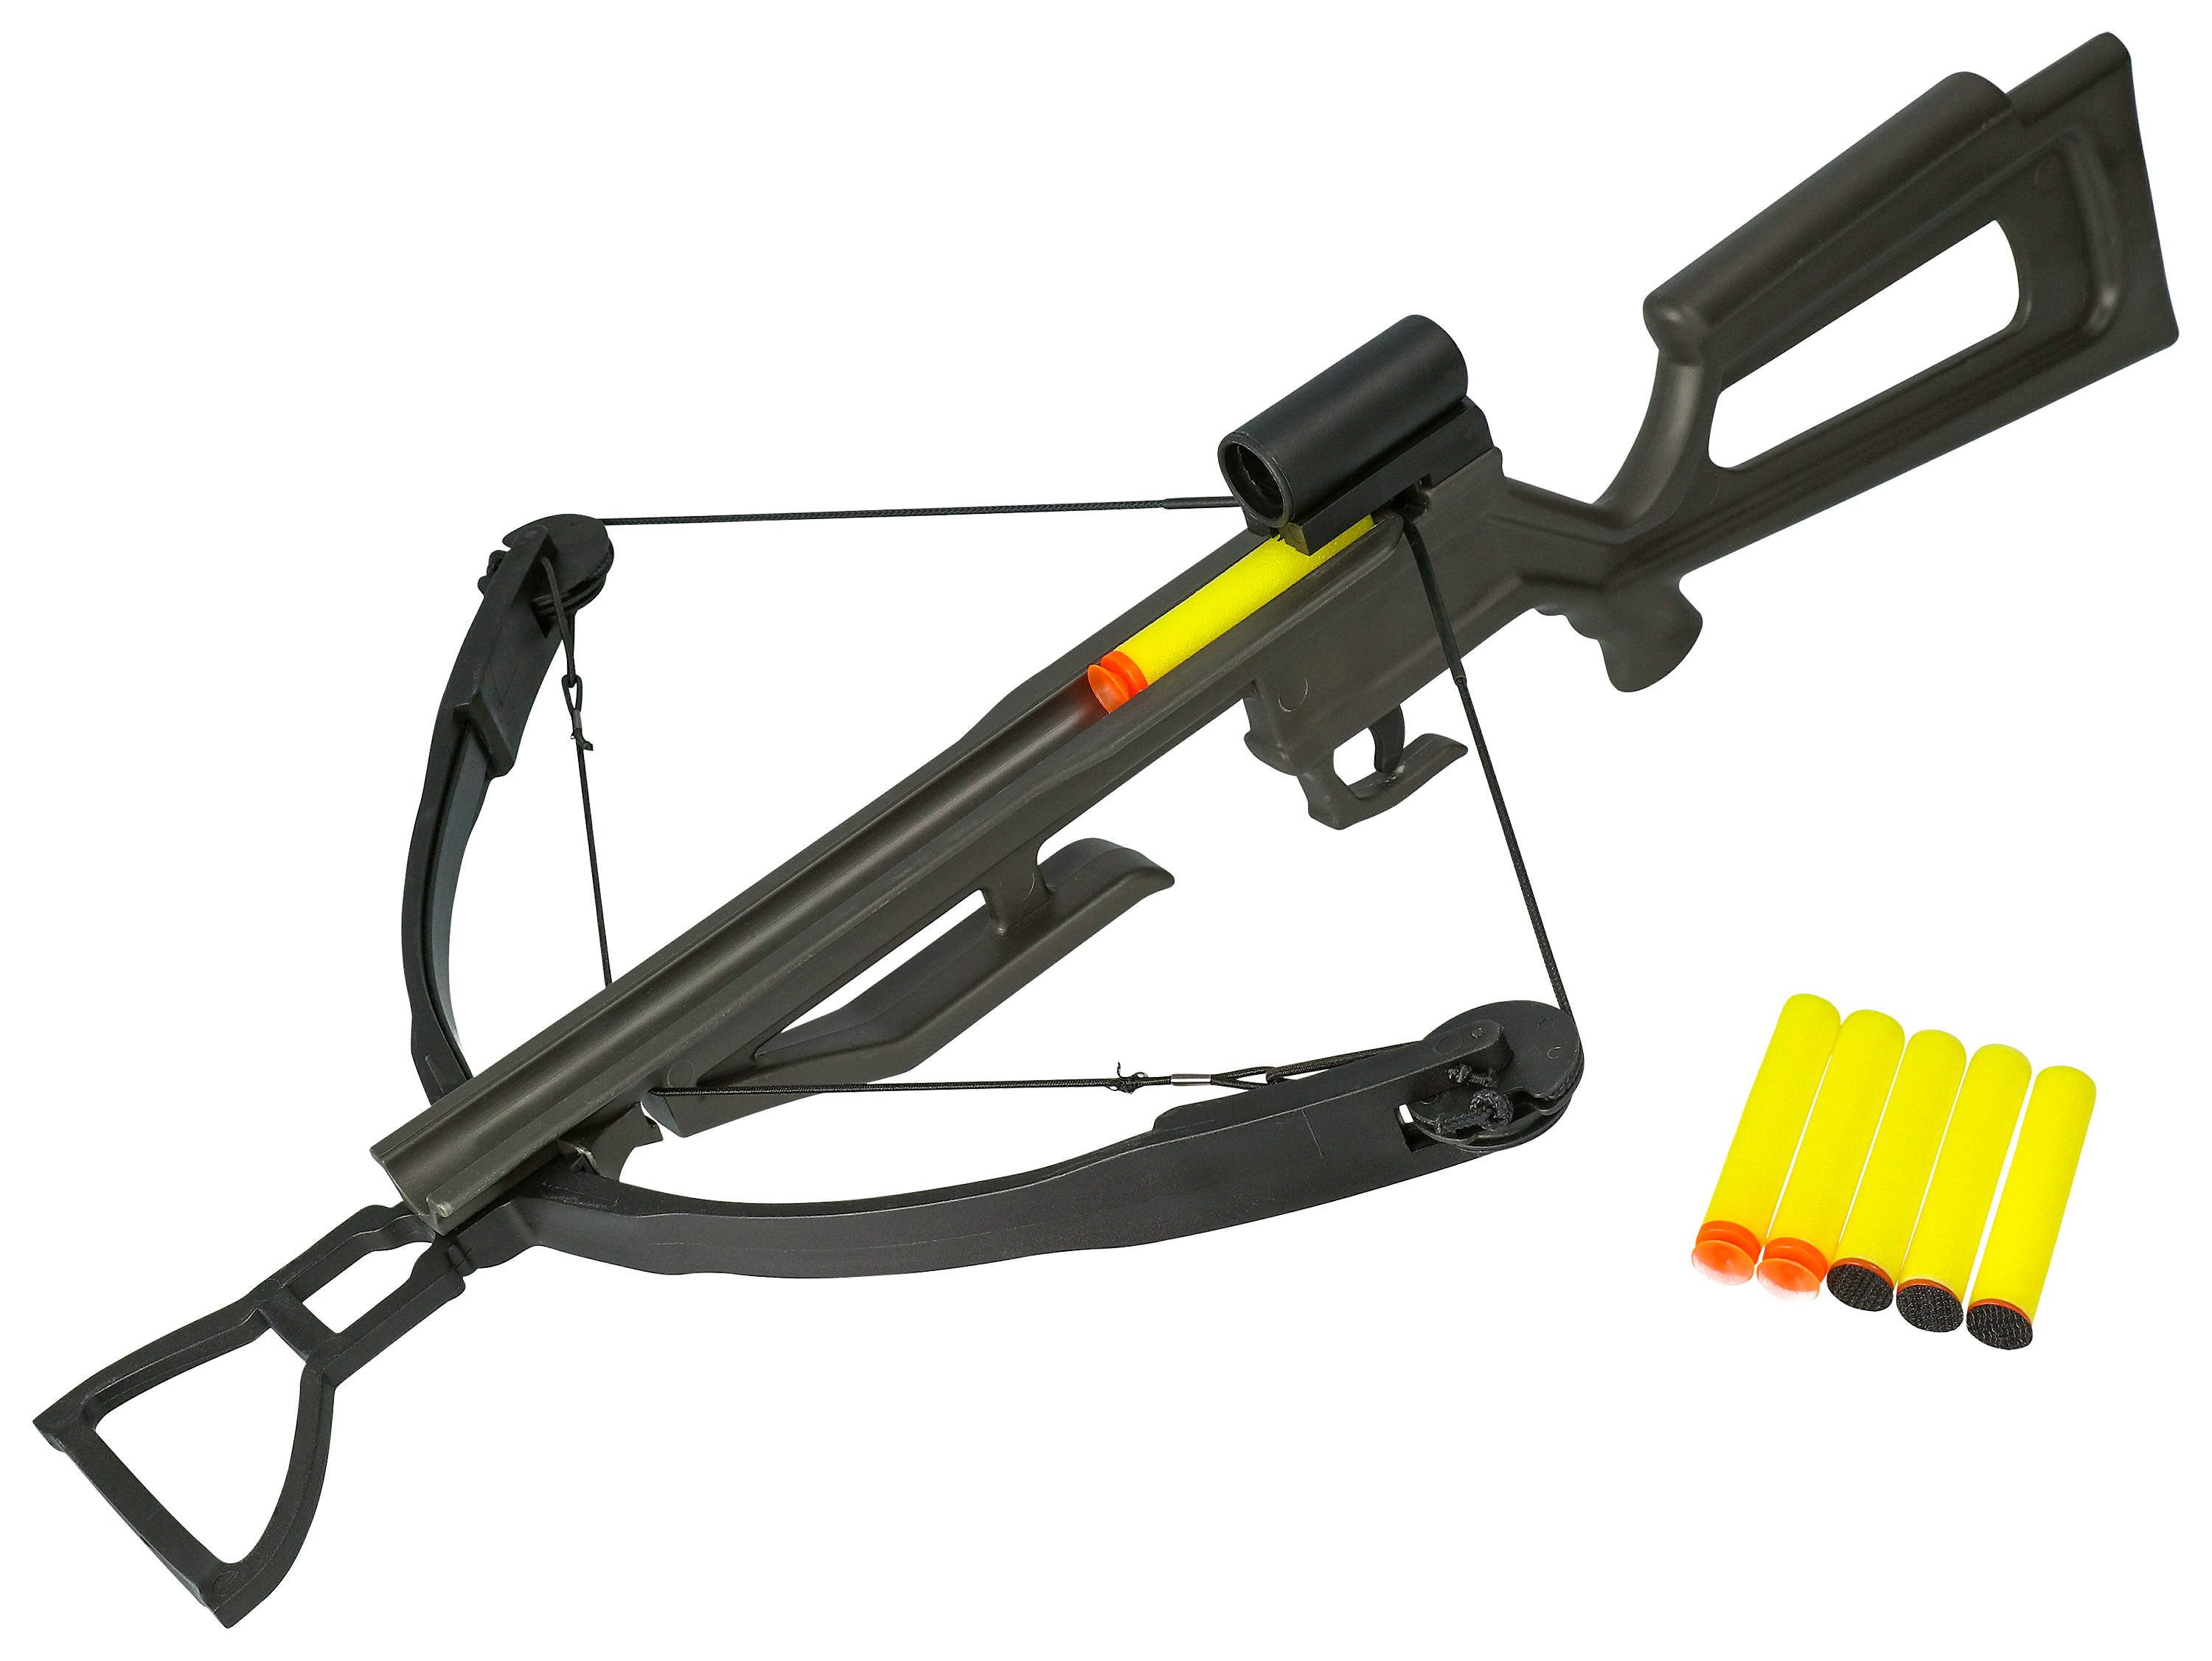 Bass Pro Shops Toy Crossbow for Kids